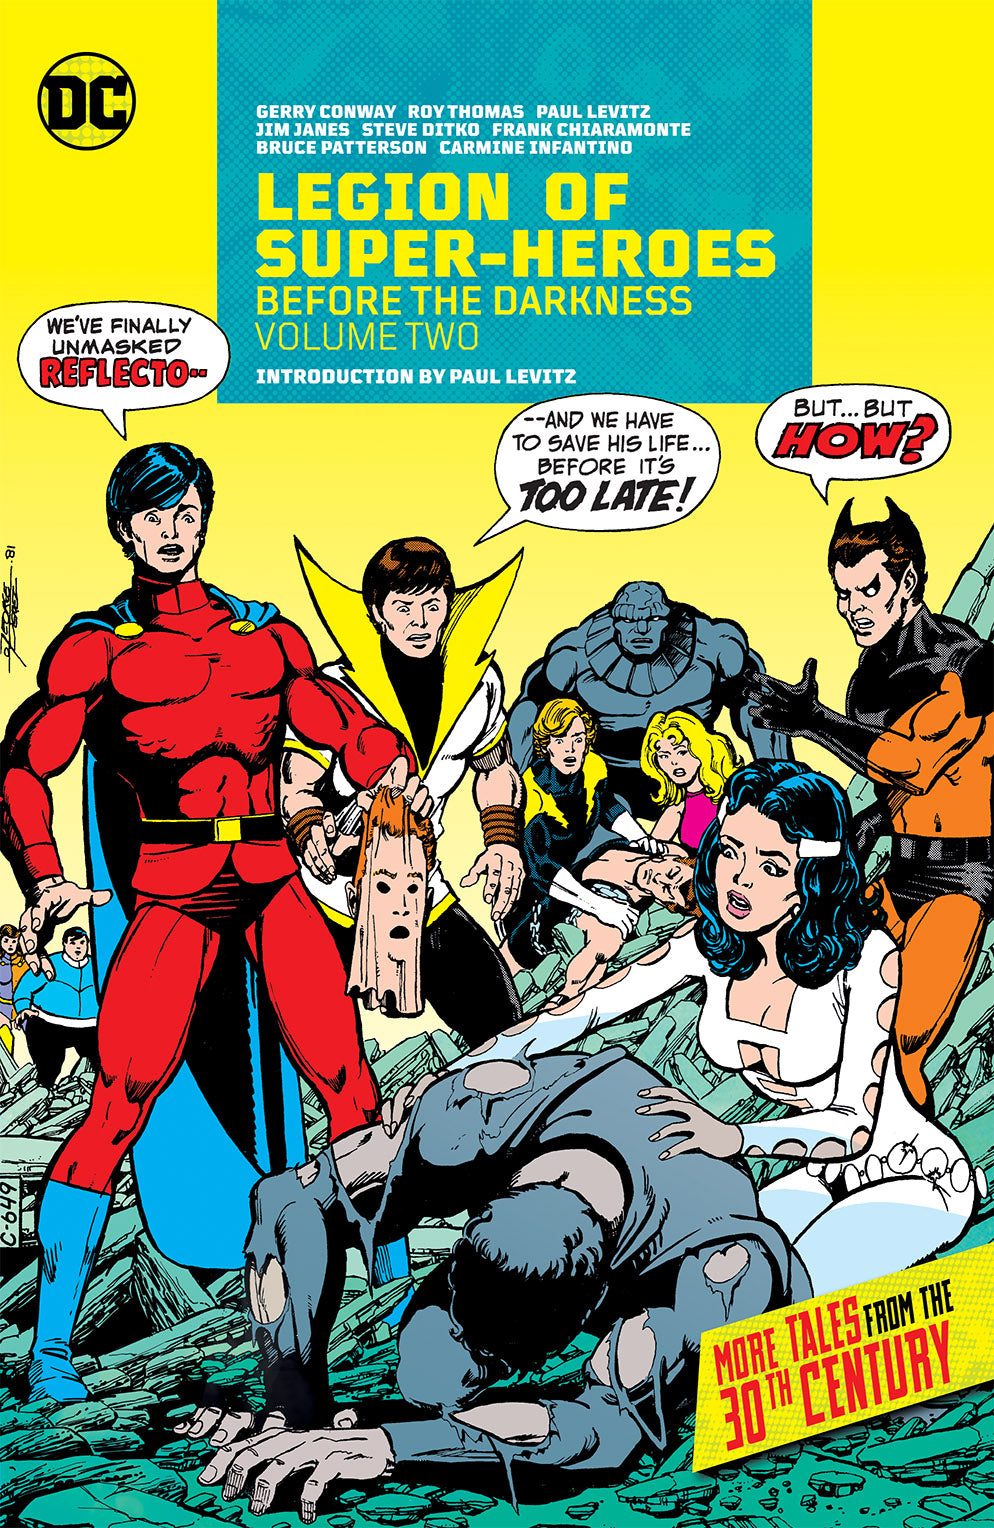 LEGION OF SUPER-HEROES BEFORE THE DARKNESS HARDCOVER VOL 02